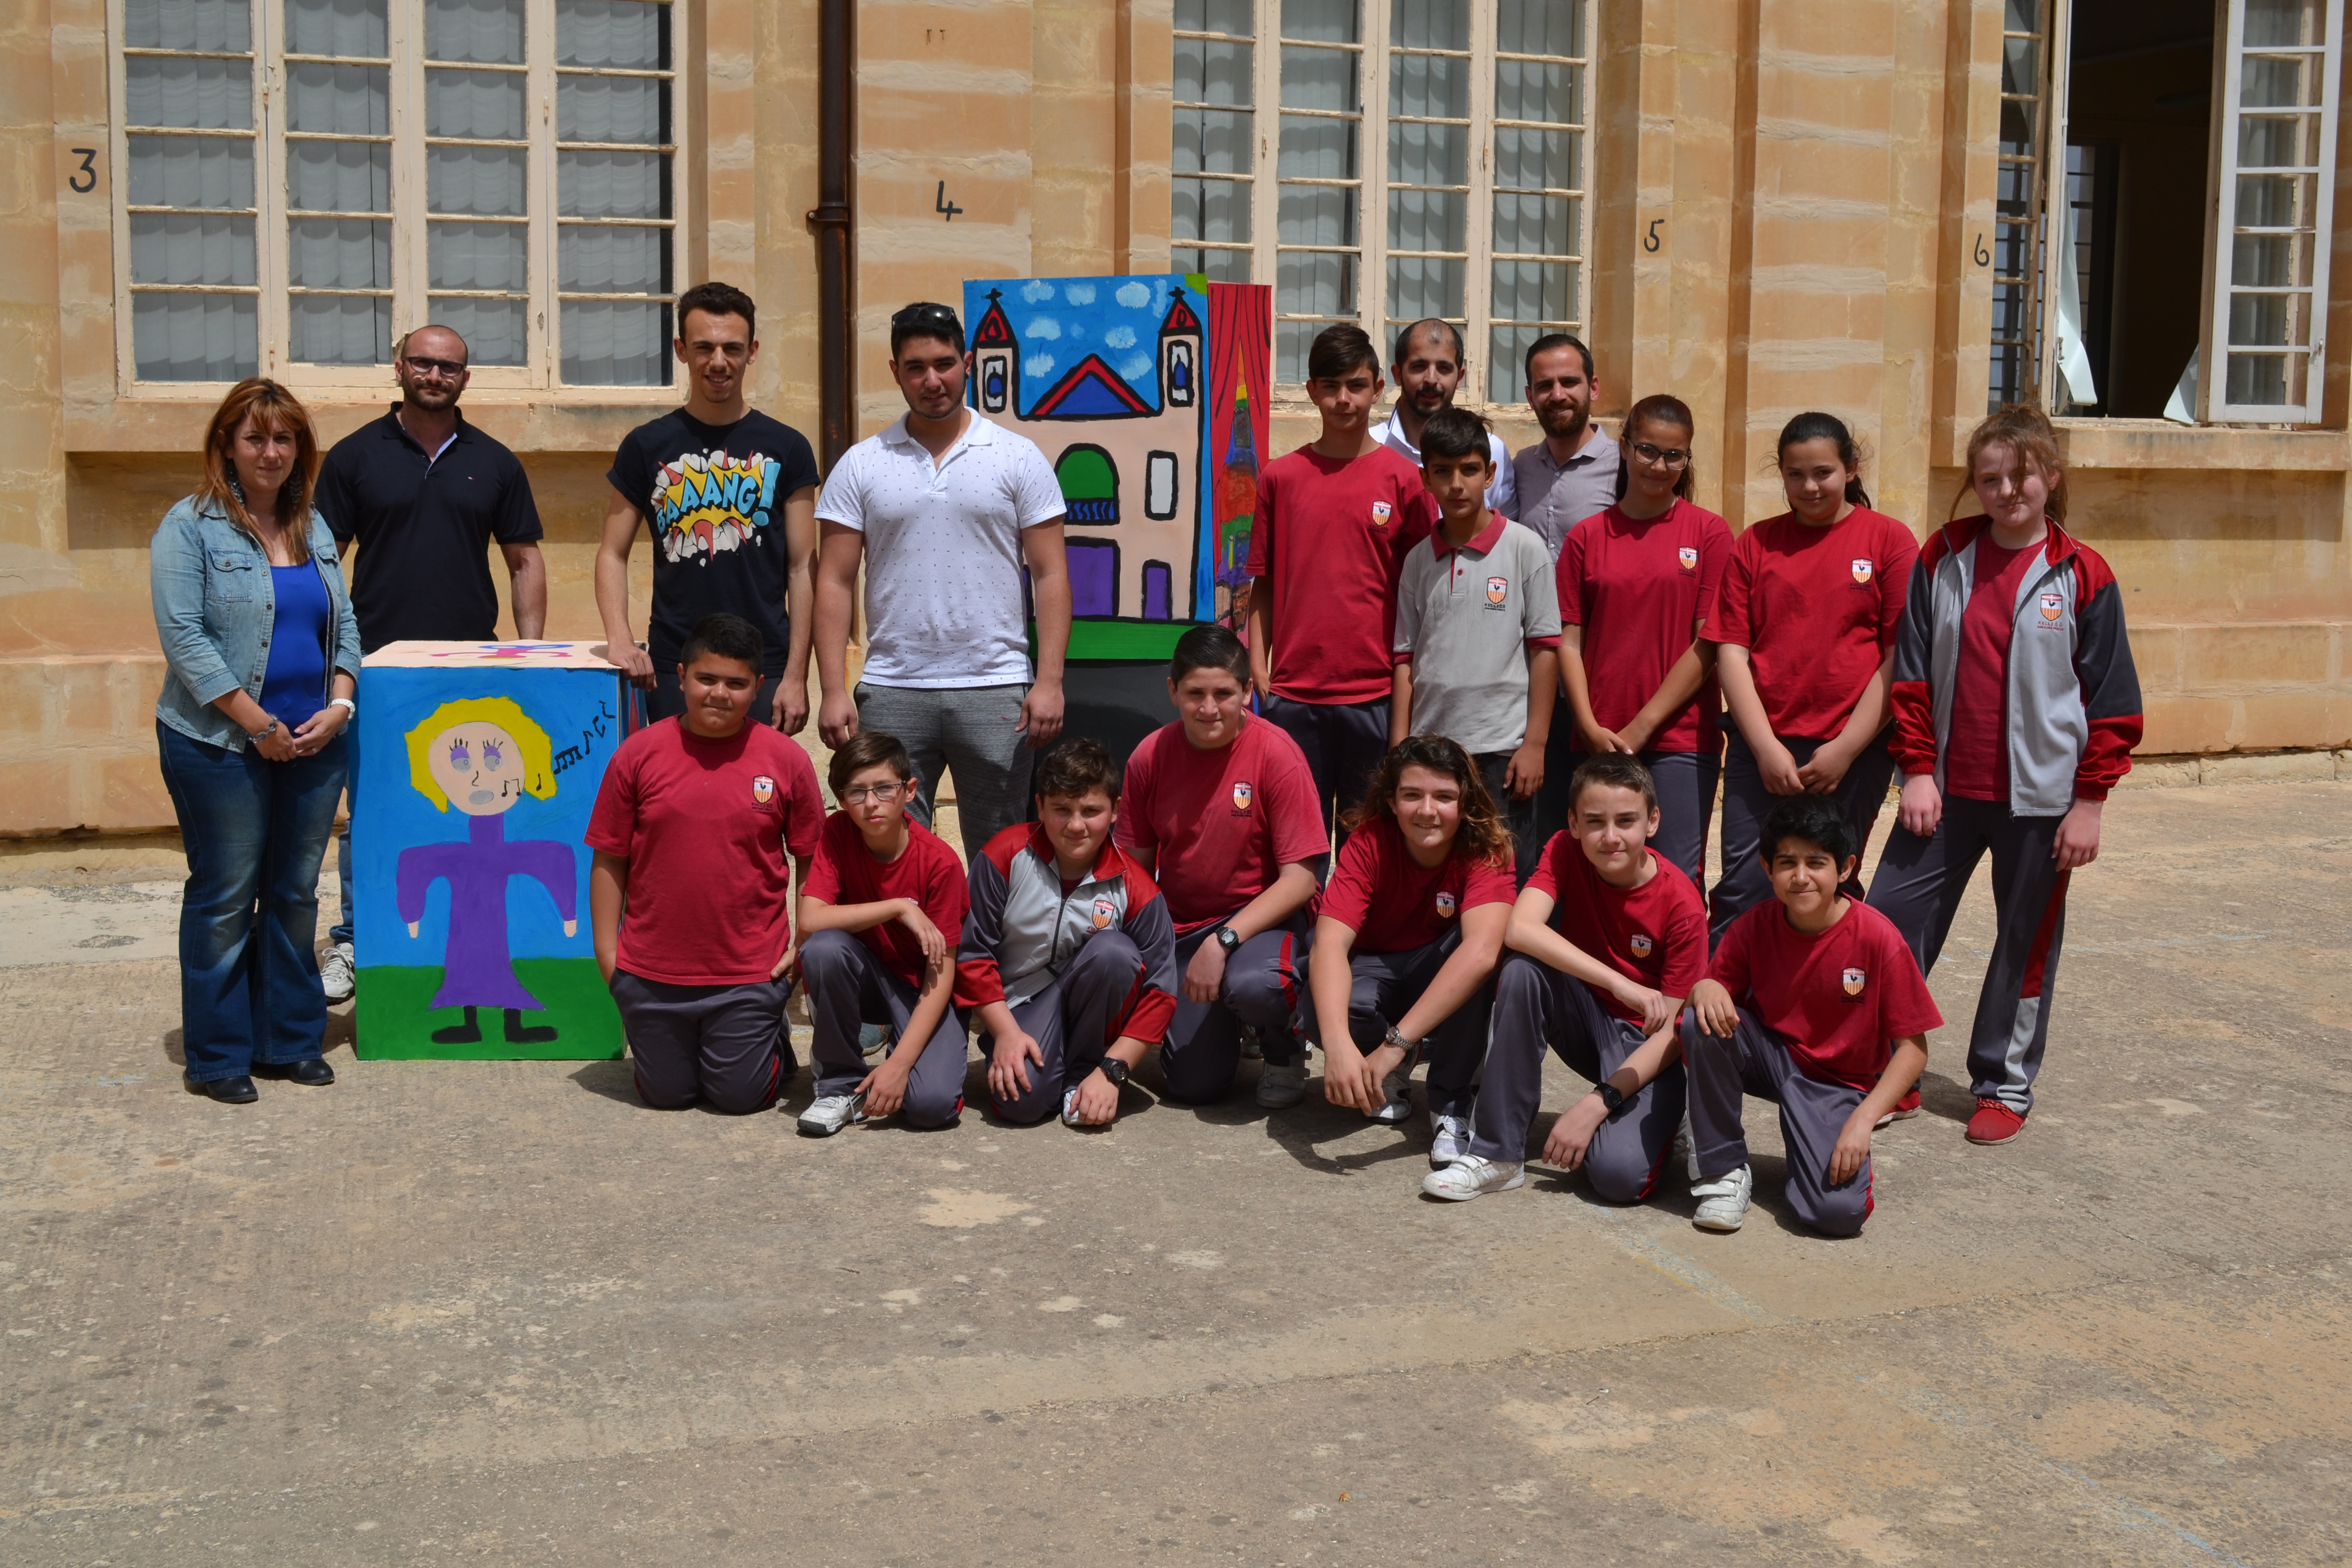 St Ġorġ Preca College Secondary School students who participated in the KantaKantun project